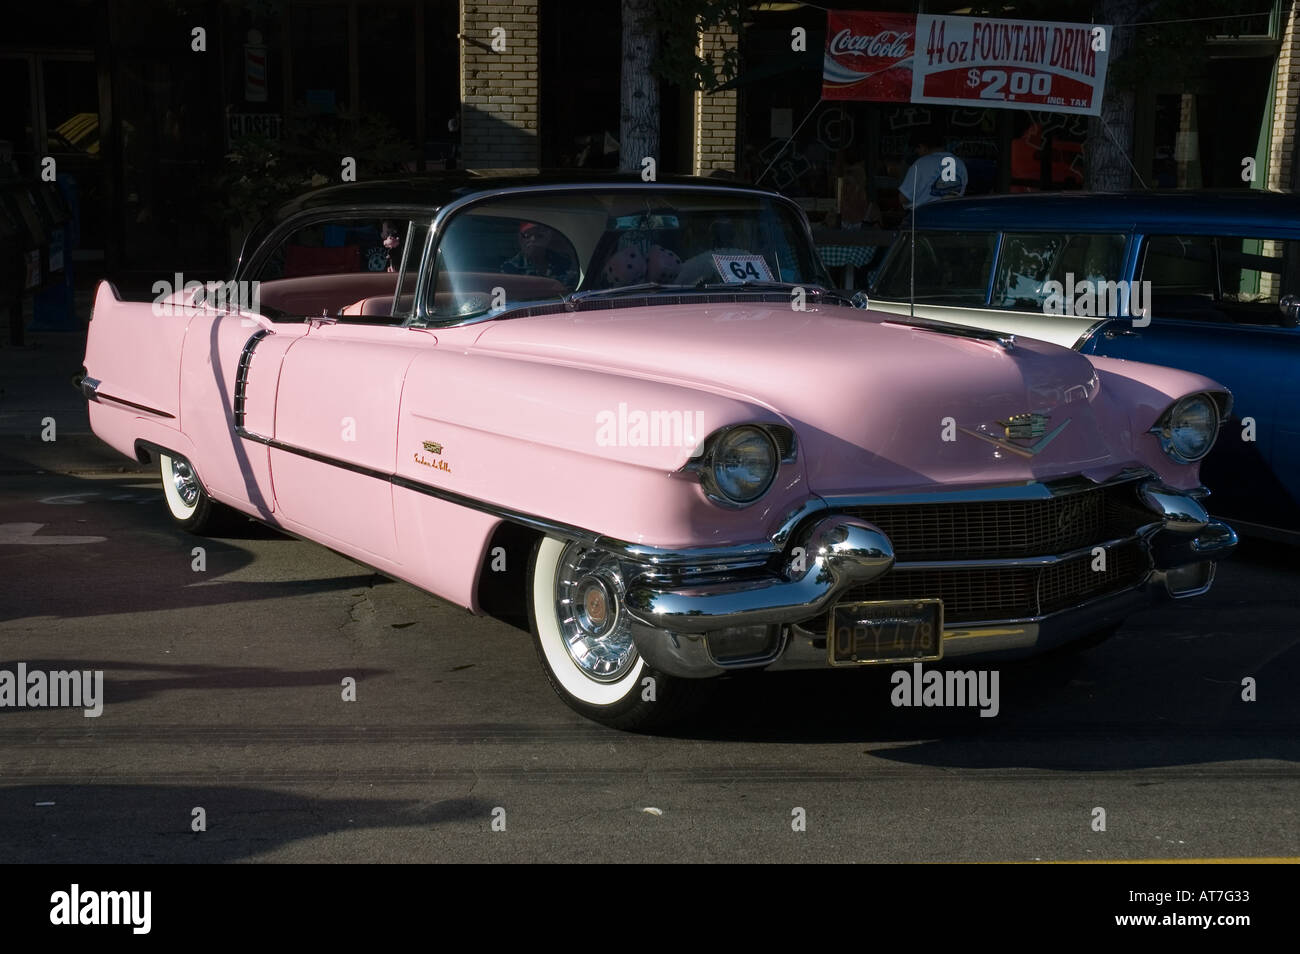 Los Angeles California car show antique customized pink Cadillac coupe  cabrio cabriolet convertible Stock Photo - Alamy